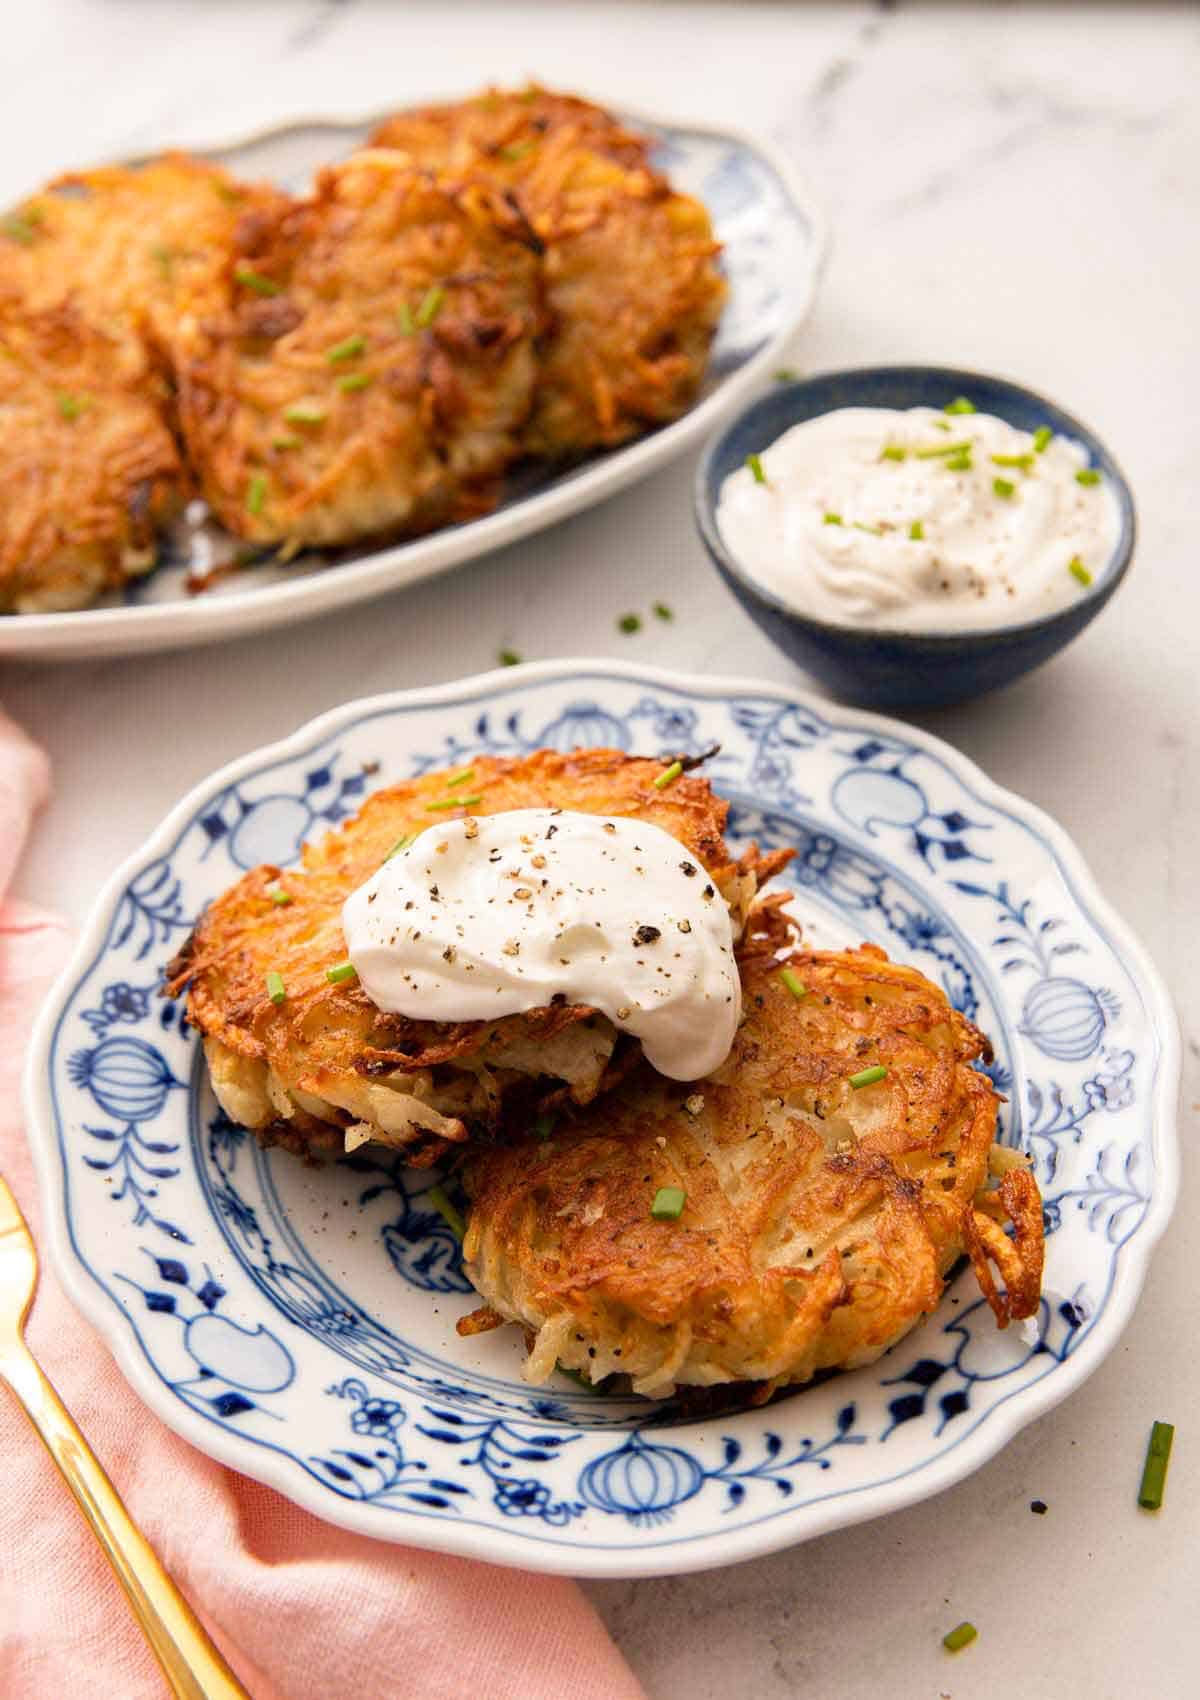 A plate with two potato pancakes with a dollop of sour cream on top. More pancakes and dip in the background.